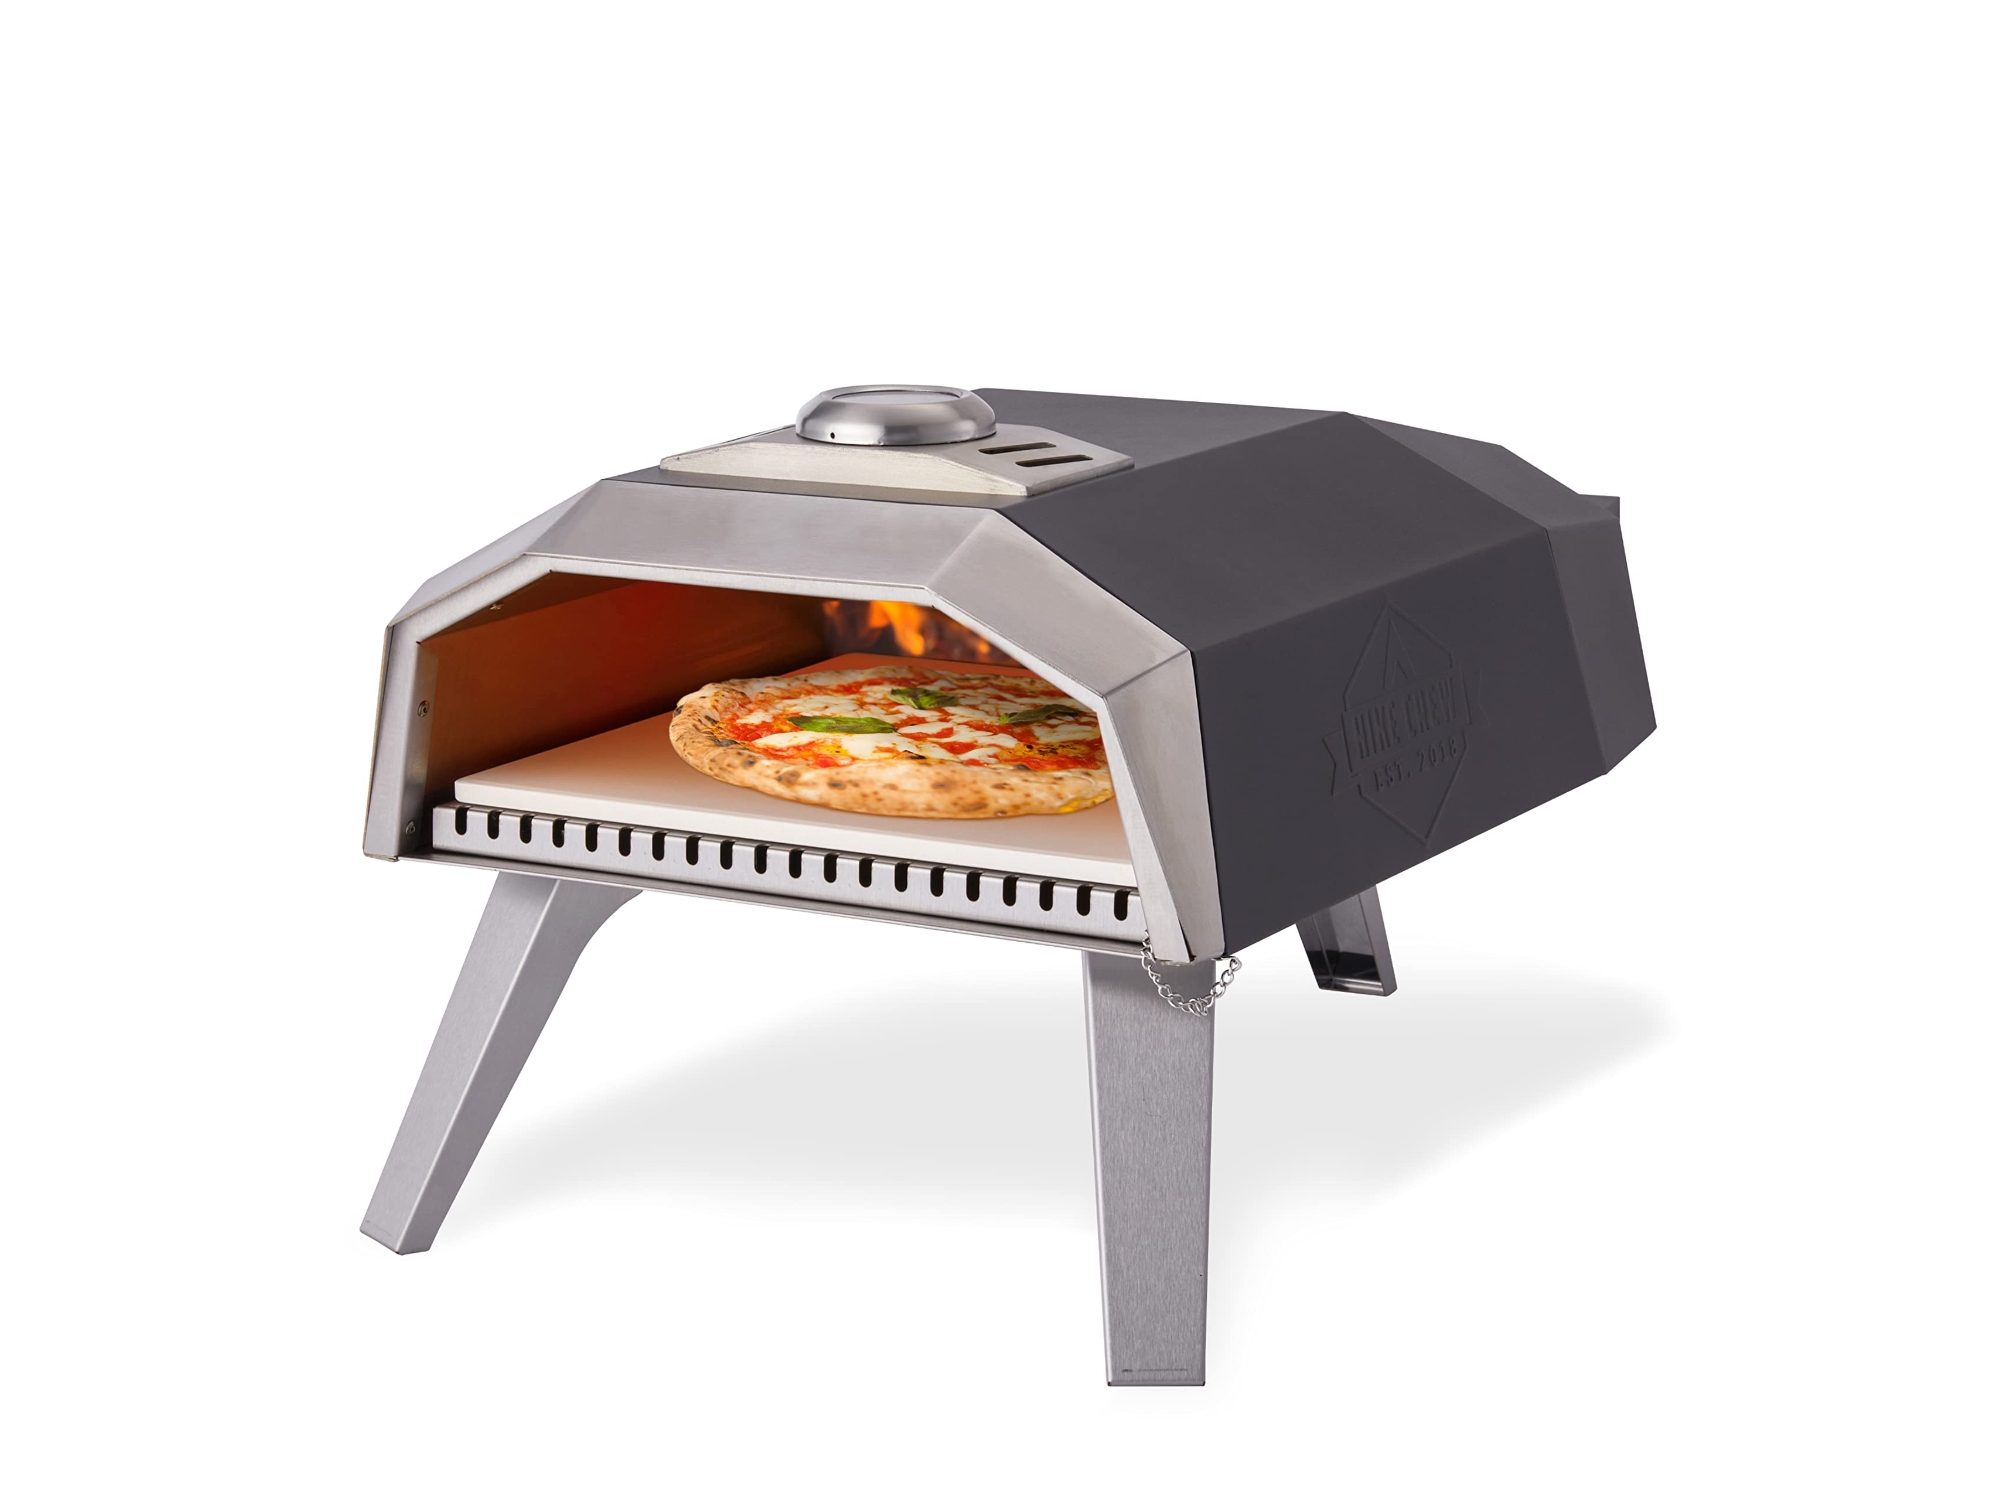 Image of Hike Crew 12 Outdoor Propane Pizza Oven Portable Pizza Maker ID 843812172905